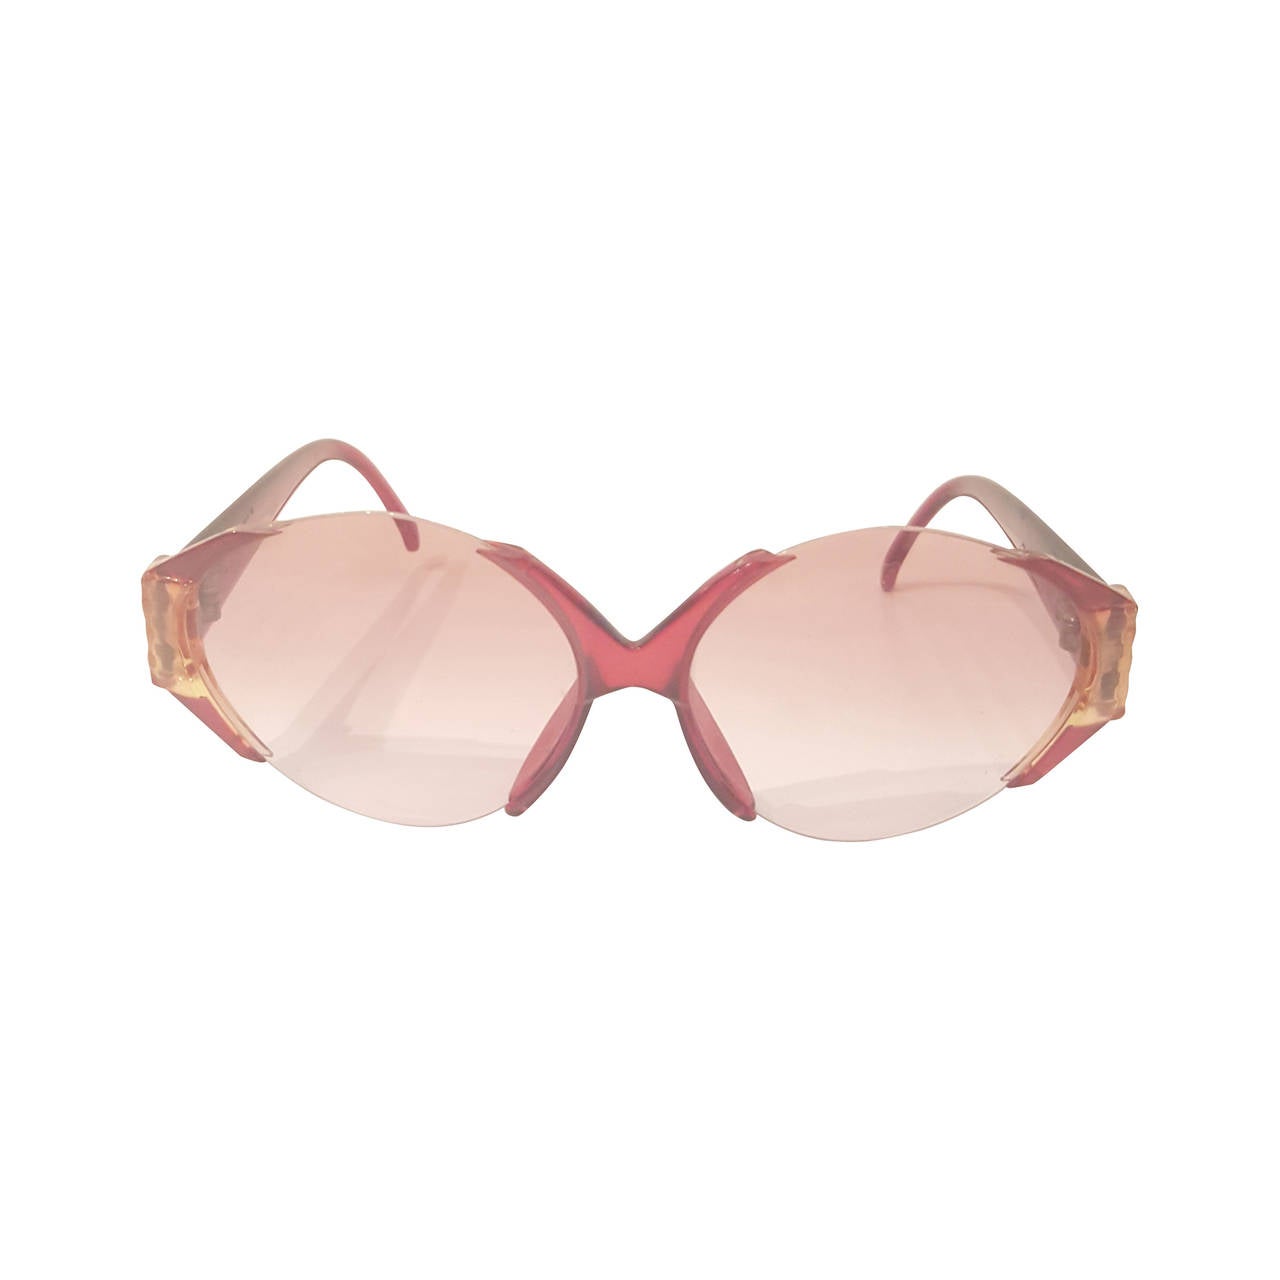 1980s Christian Dior red sunglasses